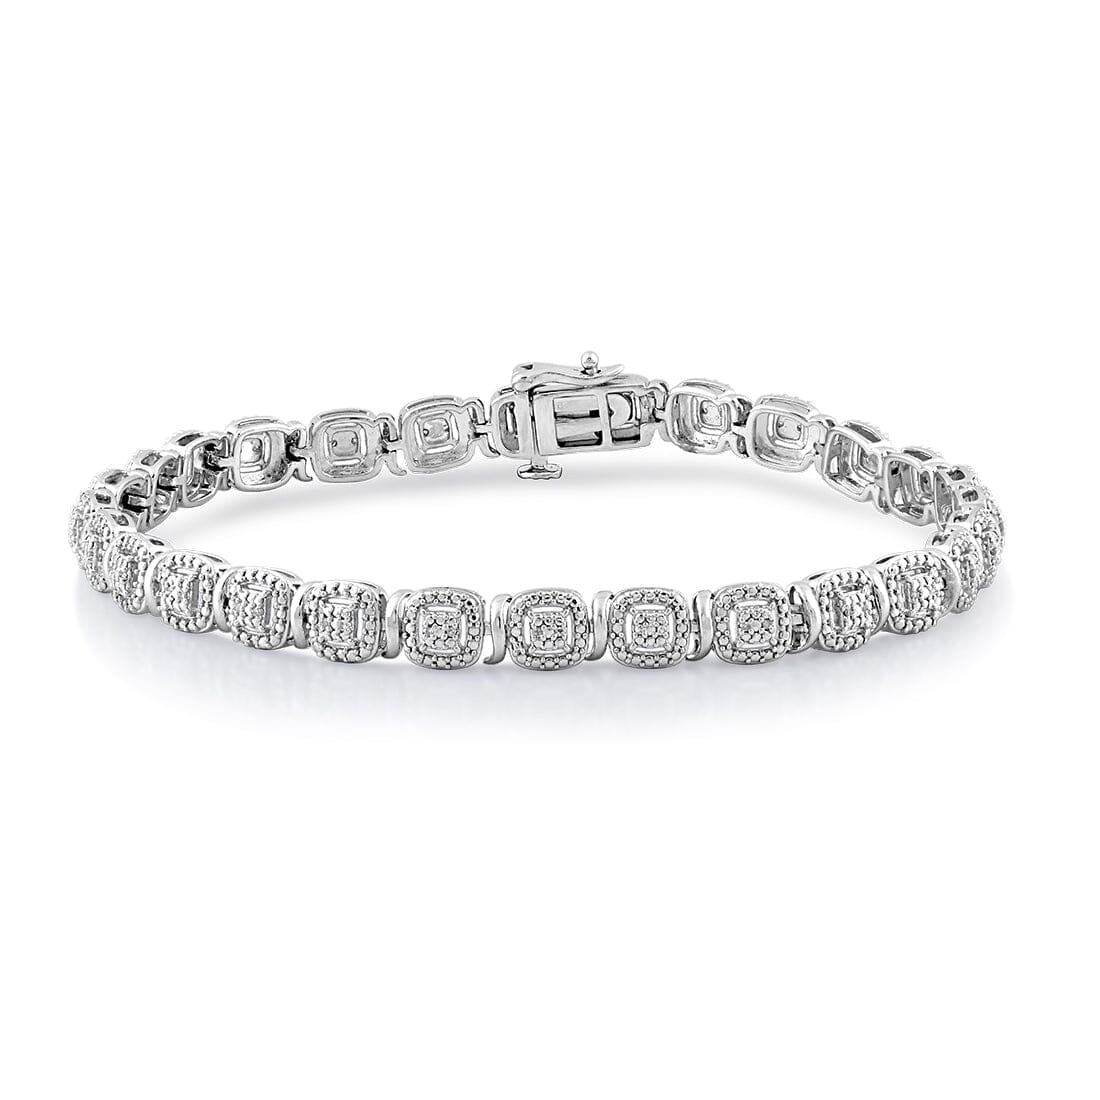 Halo Square Look Bracelet with 0.10ct of Diamonds in Sterling Silver Bracelets Bevilles 